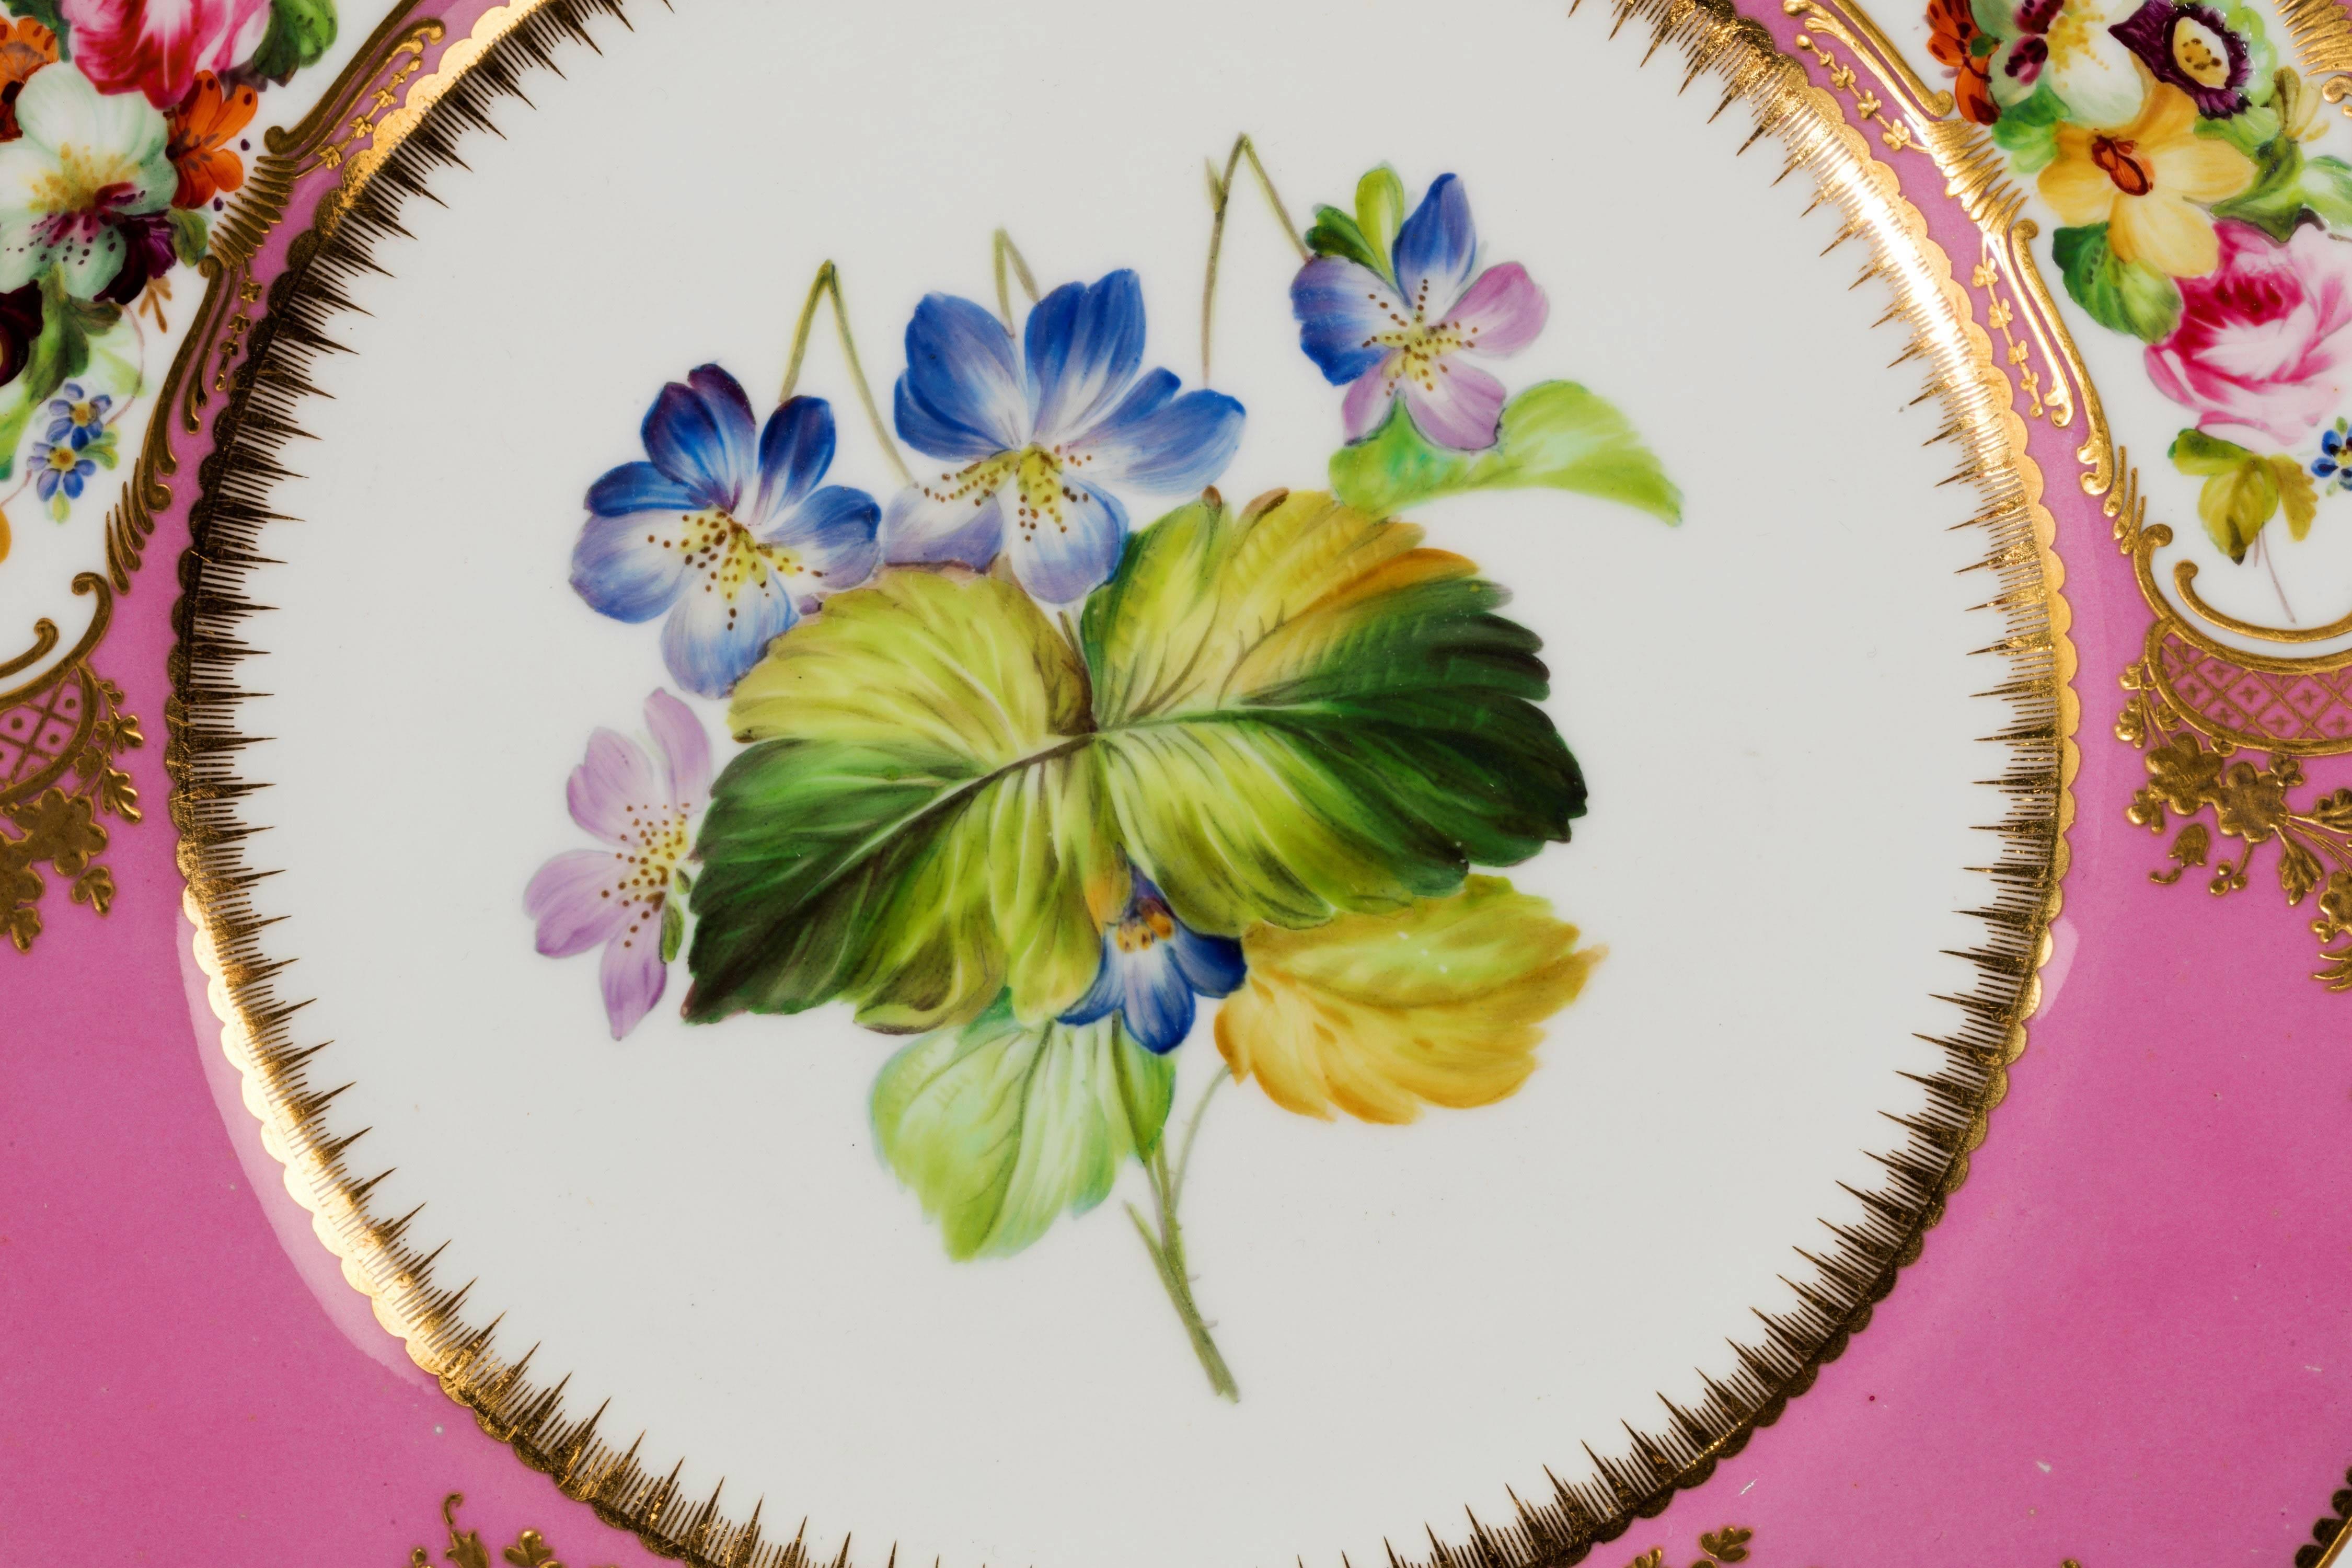 Set of Six Mid-19th Century Porcelain Botanical Plates Retailed by Daniell 2